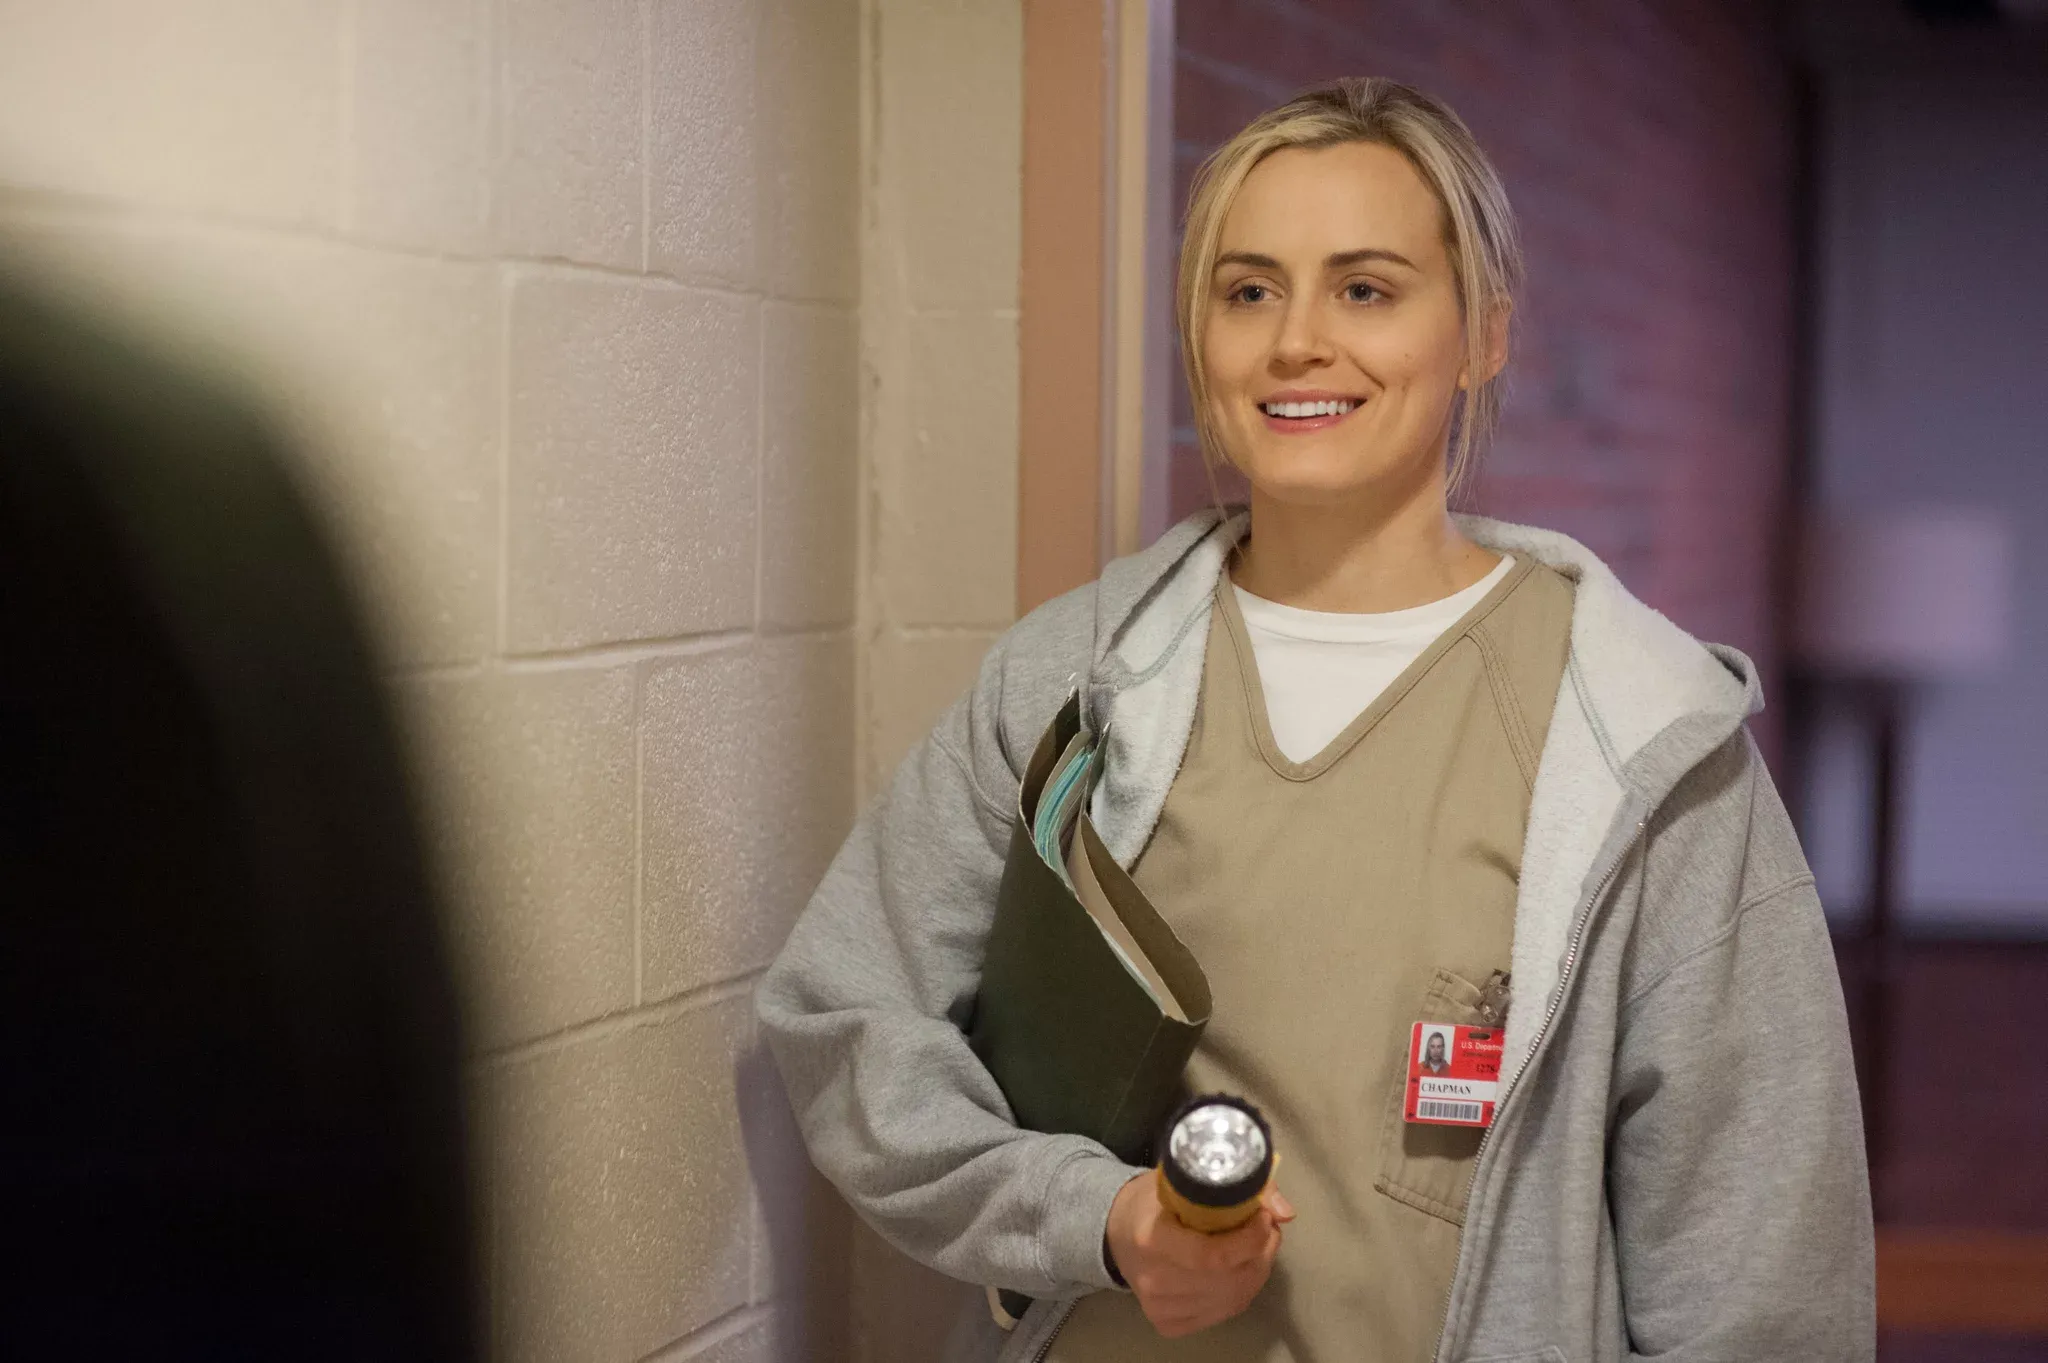 taylor schilling was piper chapman